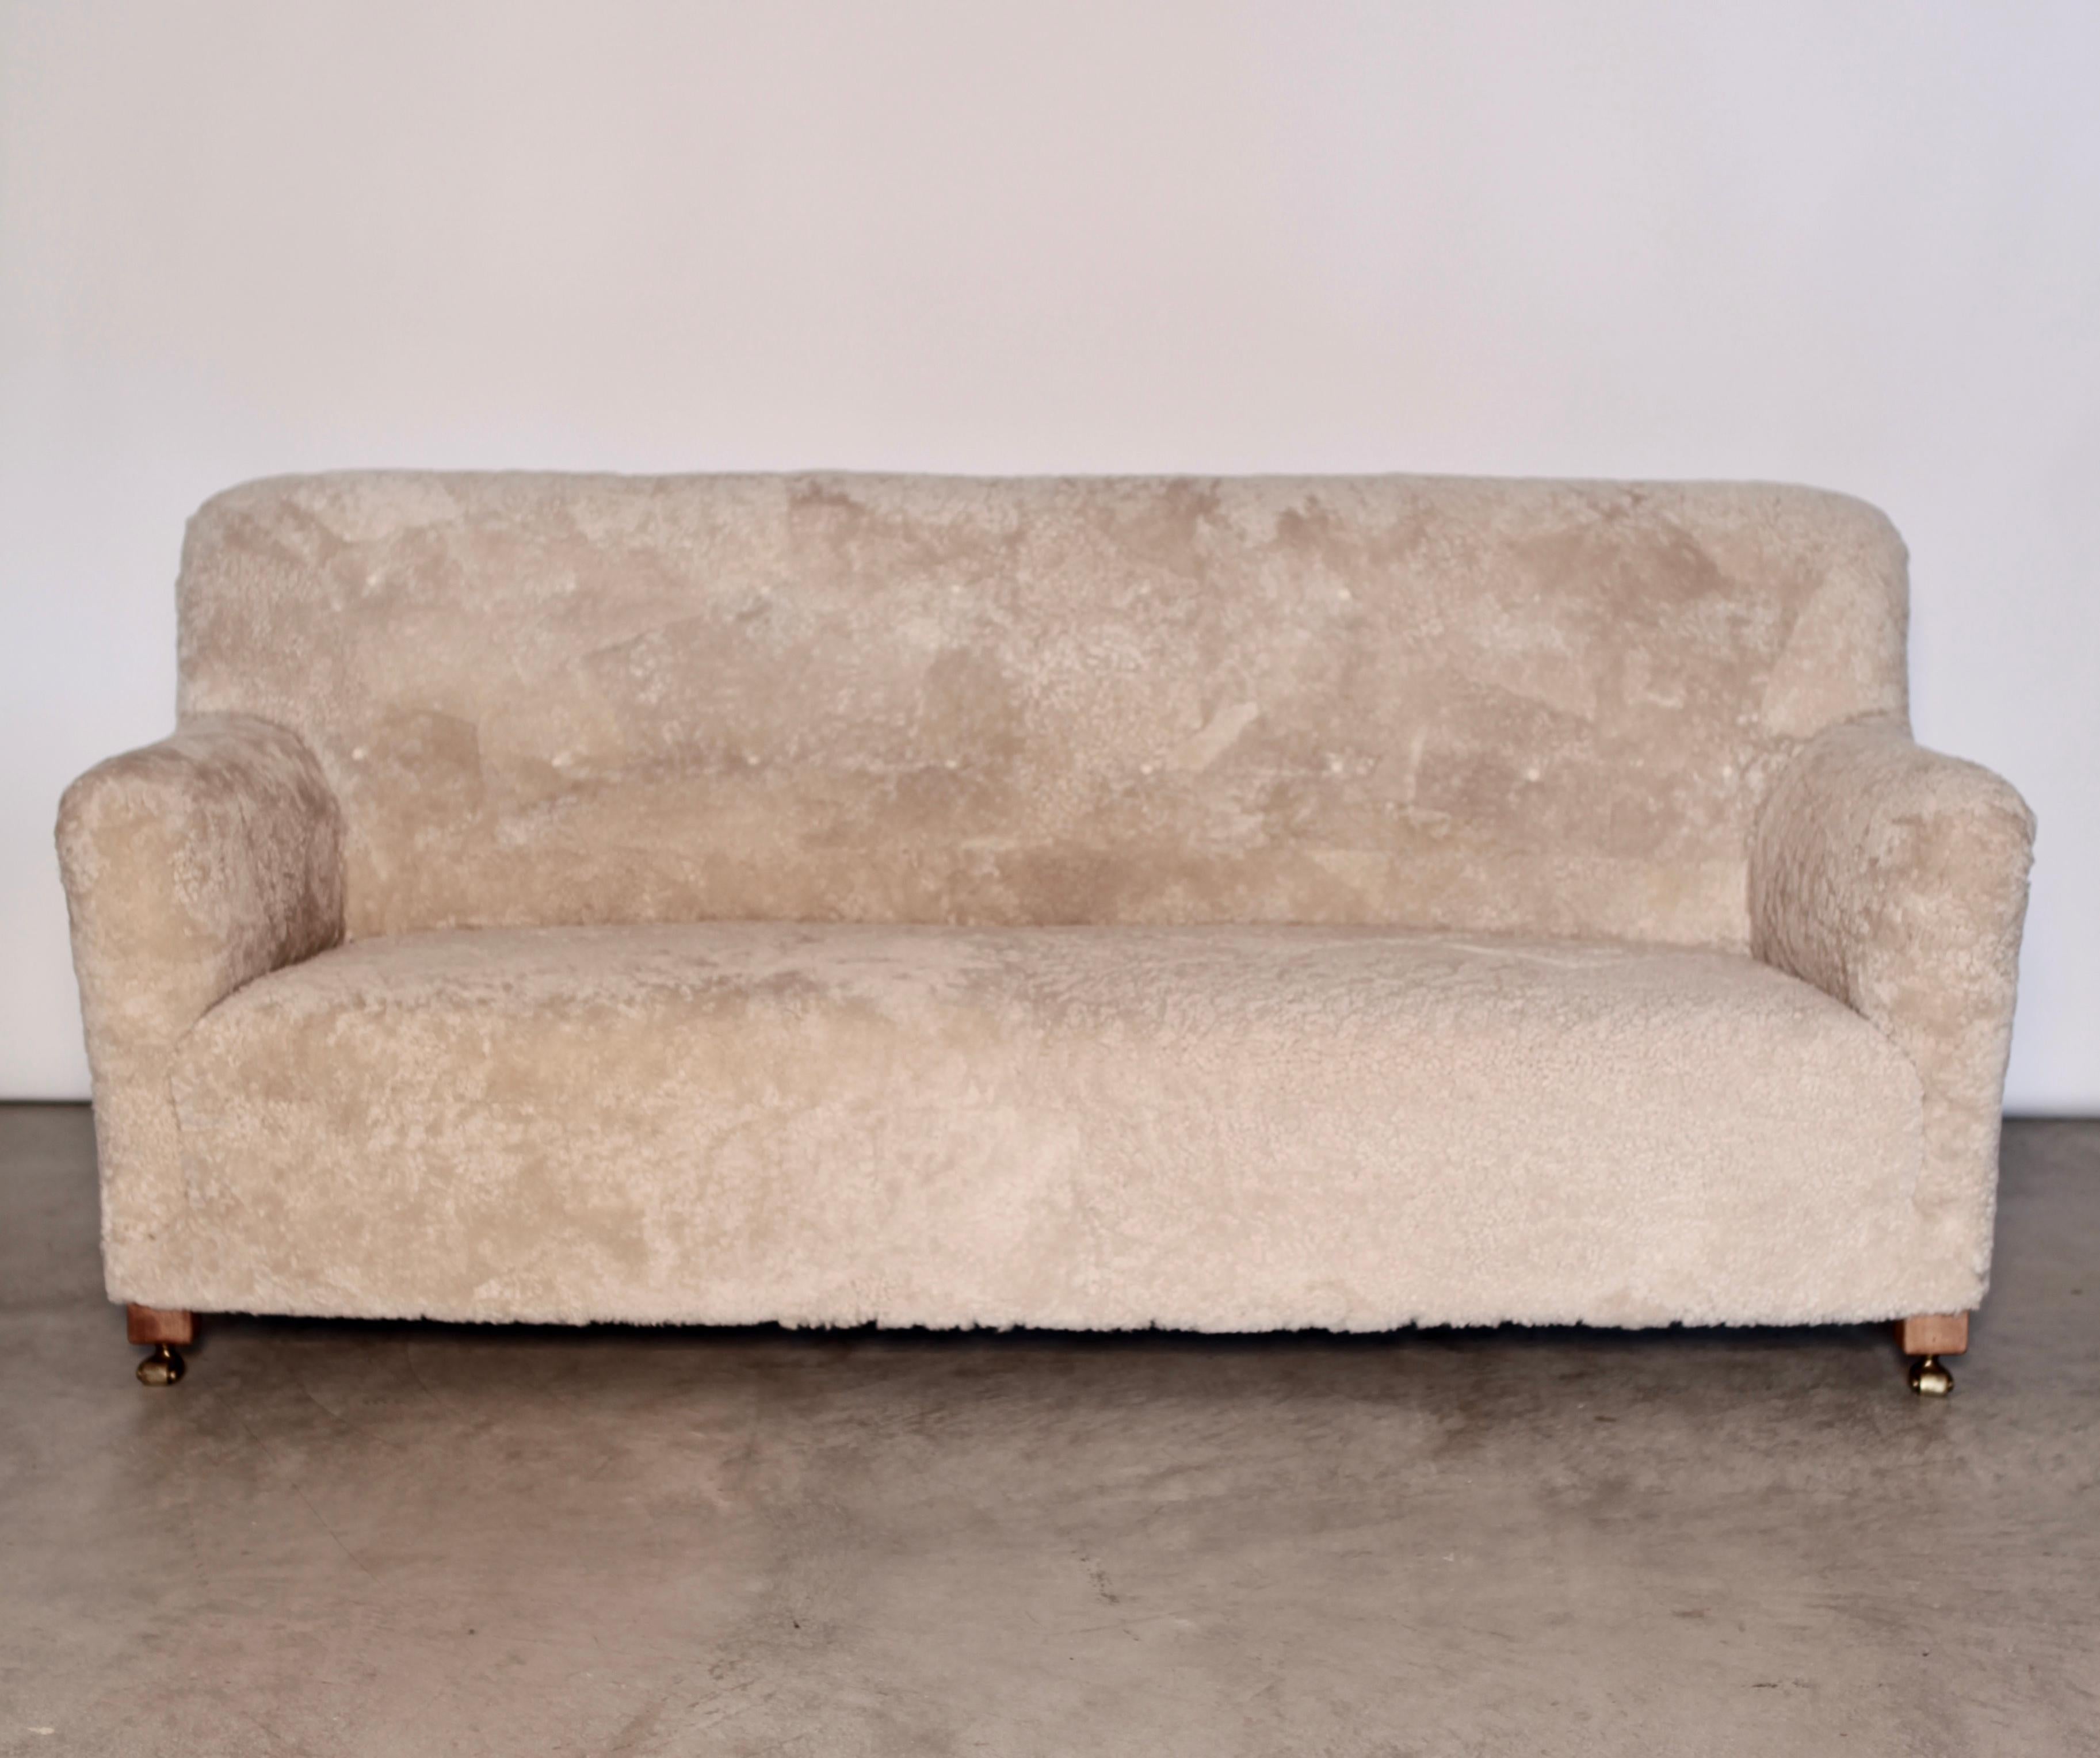 Sofa by master cabinetmaker Andreas Jeppe Iversen (1888-1979) Denmark
Stained beech legs, front legs on brass castors
Designed and manufactured, 1939
New authentic Lambskin upholstery, back fitted with buttons
High backrest 

Andreas Jeppe